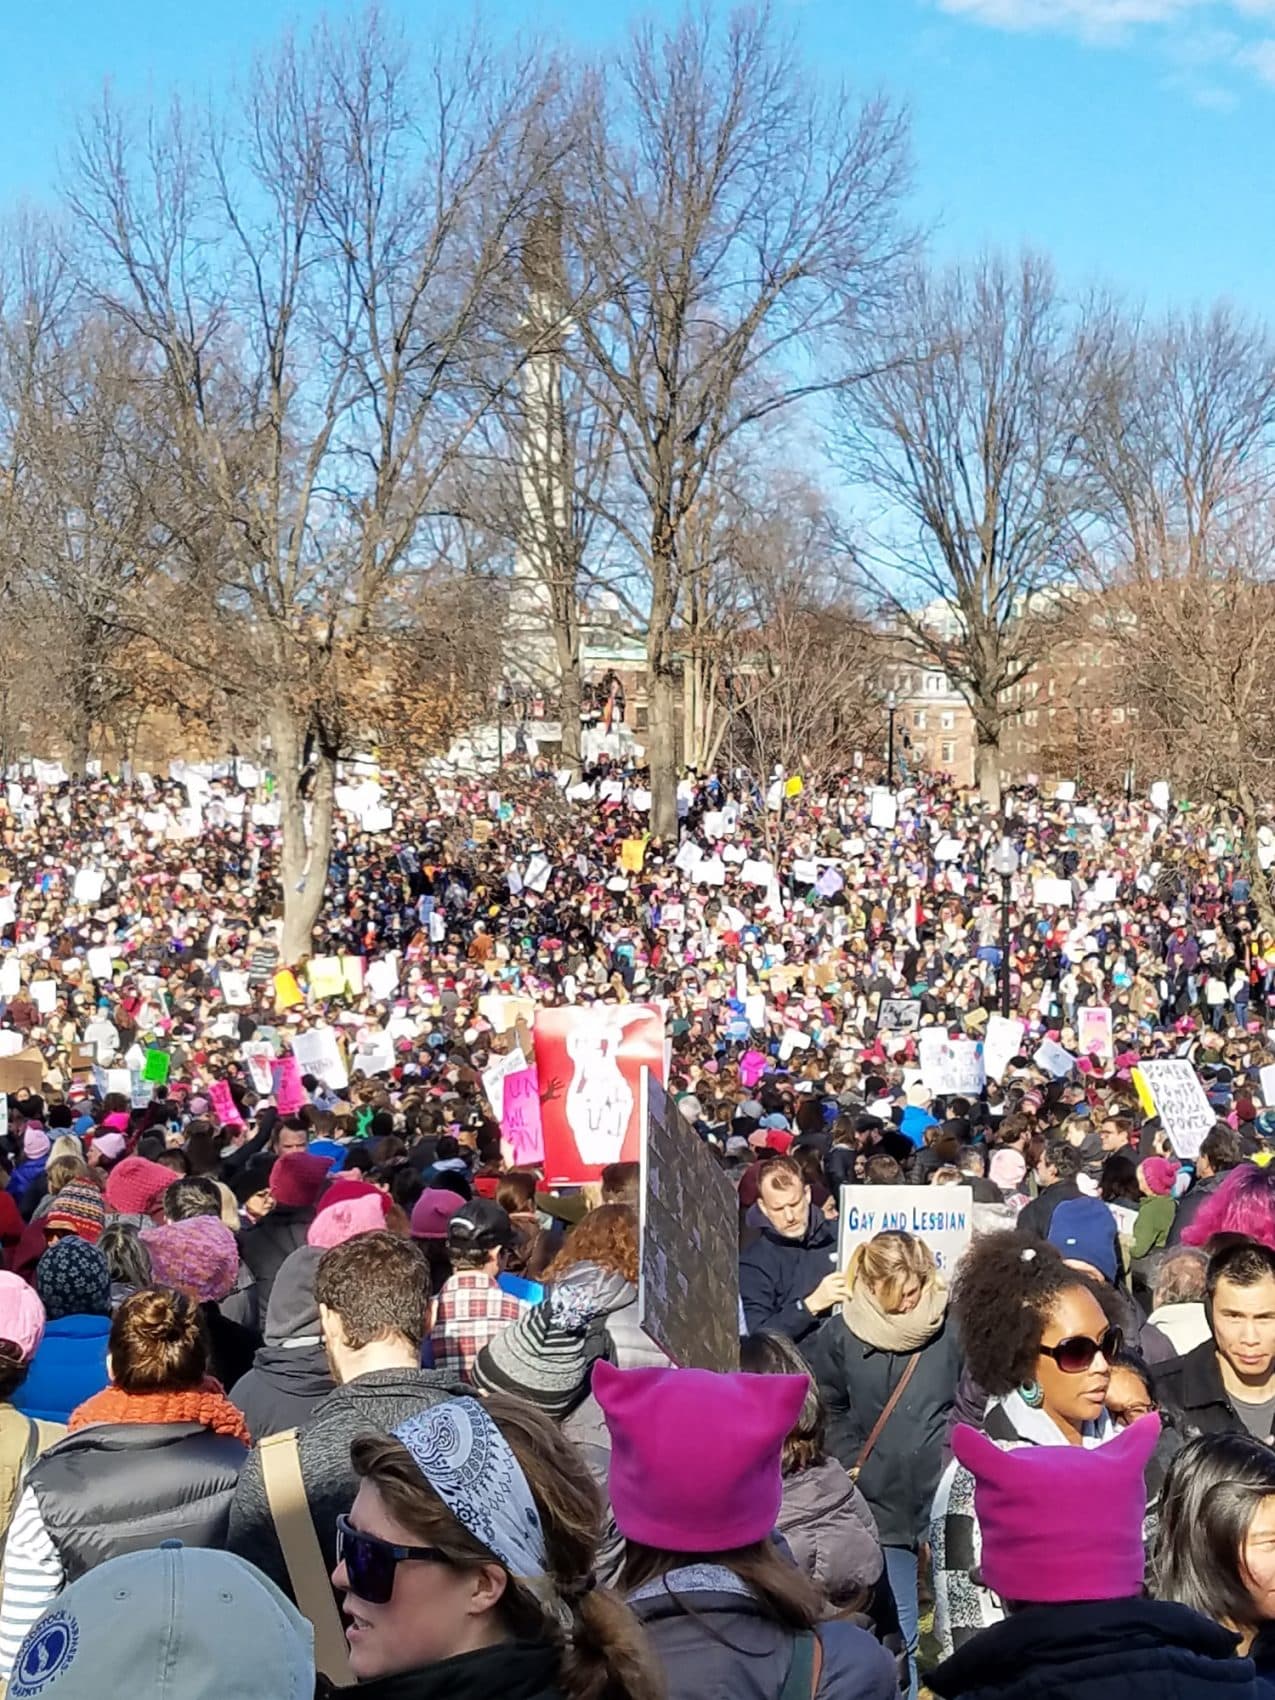 A view of Boston's Women's March, as seen from the city's Boston Common. (Courtesy Jessica Harder)